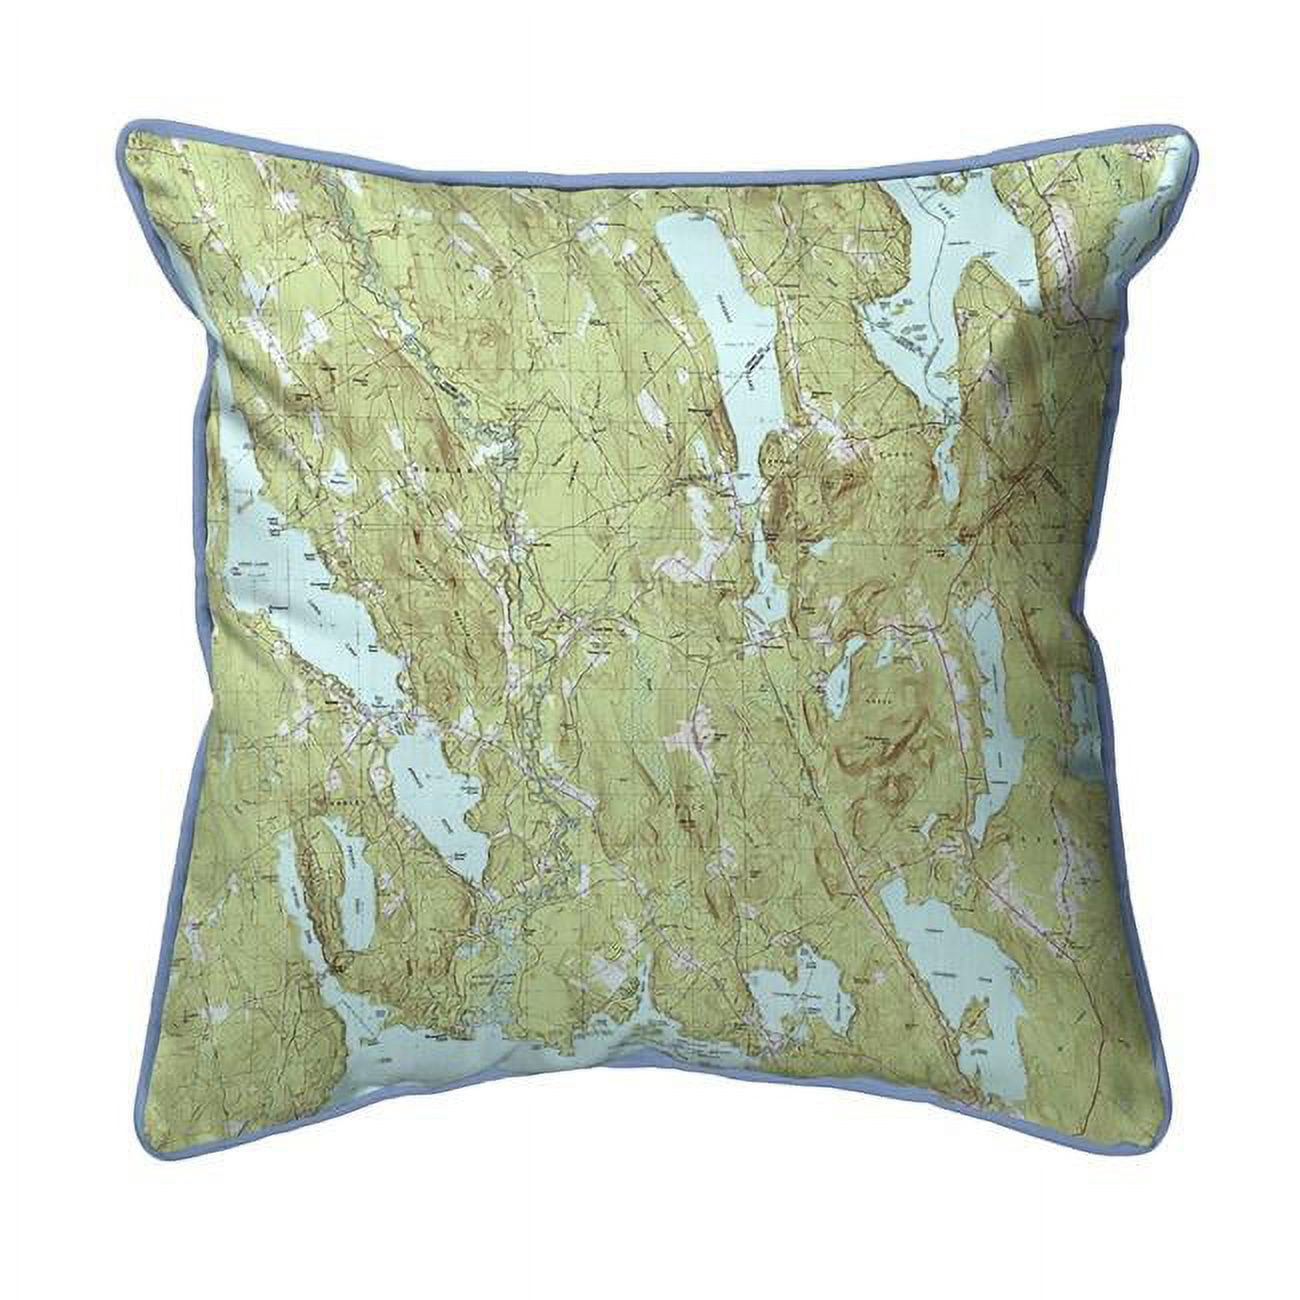 Casco & Sebago Lake, ME Nautical Map Small Corded Indoor & Outdoor Pillow - 12 x 12 in -  JensenDistributionServices, MI2814712